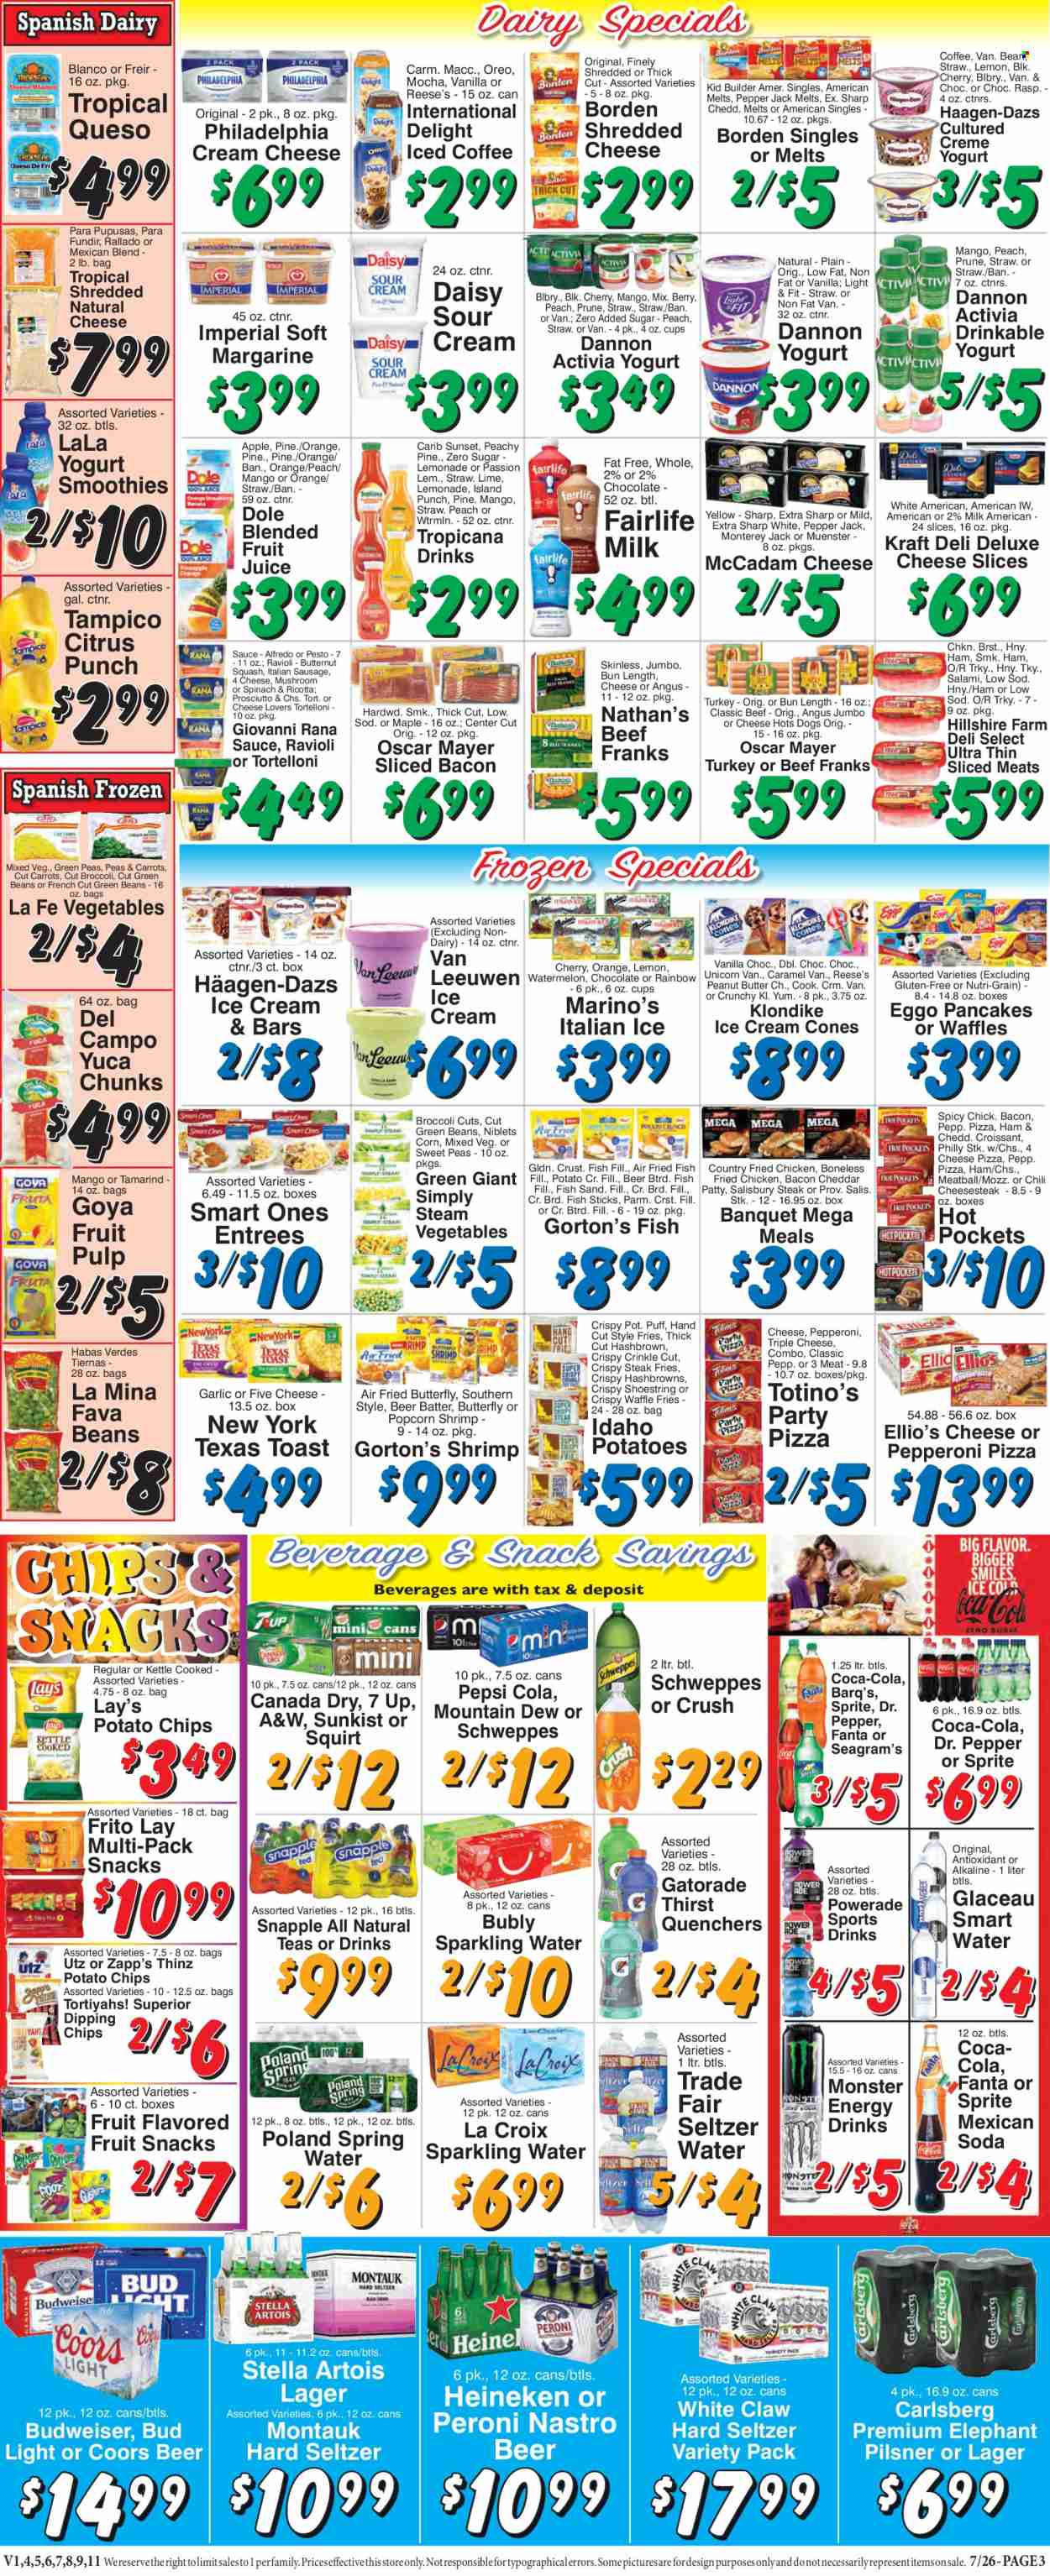 thumbnail - Trade Fair Supermarket Flyer - 07/26/2024 - 08/01/2024 - Sales products - croissant, waffles, broccoli, butternut squash, carrots, fava beans, green beans, Dole, seafood, shrimps, Gorton's, fried fish, ravioli, hot pocket, pizza, snack, fried chicken, pancakes, Giovanni Rana, fish sticks, Kraft®, Rana, ready meal, tortelloni, salami, Hillshire Farm, Oscar Mayer, sliced meat, frankfurters, cream cheese, Monterey Jack cheese, sandwich slices, shredded cheese, sliced cheese, Philadelphia, Pepper Jack cheese, cheese, Münster cheese, Oreo, Activia, Dannon, milk, yoghurt drink, margarine, sour cream, ice cream, Reese's, Häagen-Dazs, ice cones, frozen vegetables, hash browns, potato fries, fruit snack, potato chips, Lay’s, salty snack, tamarind, Goya, pesto, peanut butter, Canada Dry, Coca-Cola, ginger ale, lemonade, Mountain Dew, Schweppes, Sprite, Powerade, Pepsi, fruit juice, Fanta, energy drink, fruit drink, Dr. Pepper, soft drink, 7UP, Monster Energy, Snapple, A&W, Gatorade, fruit punch, electrolyte drink, smoothie, soda, Smartwater, iced coffee, carbonated soft drink, coffee drink, White Claw, Hard Seltzer, beer, Budweiser, Stella Artois, Bud Light, Heineken, Carlsberg, Peroni, Lager, steak, Coors. Page 3.